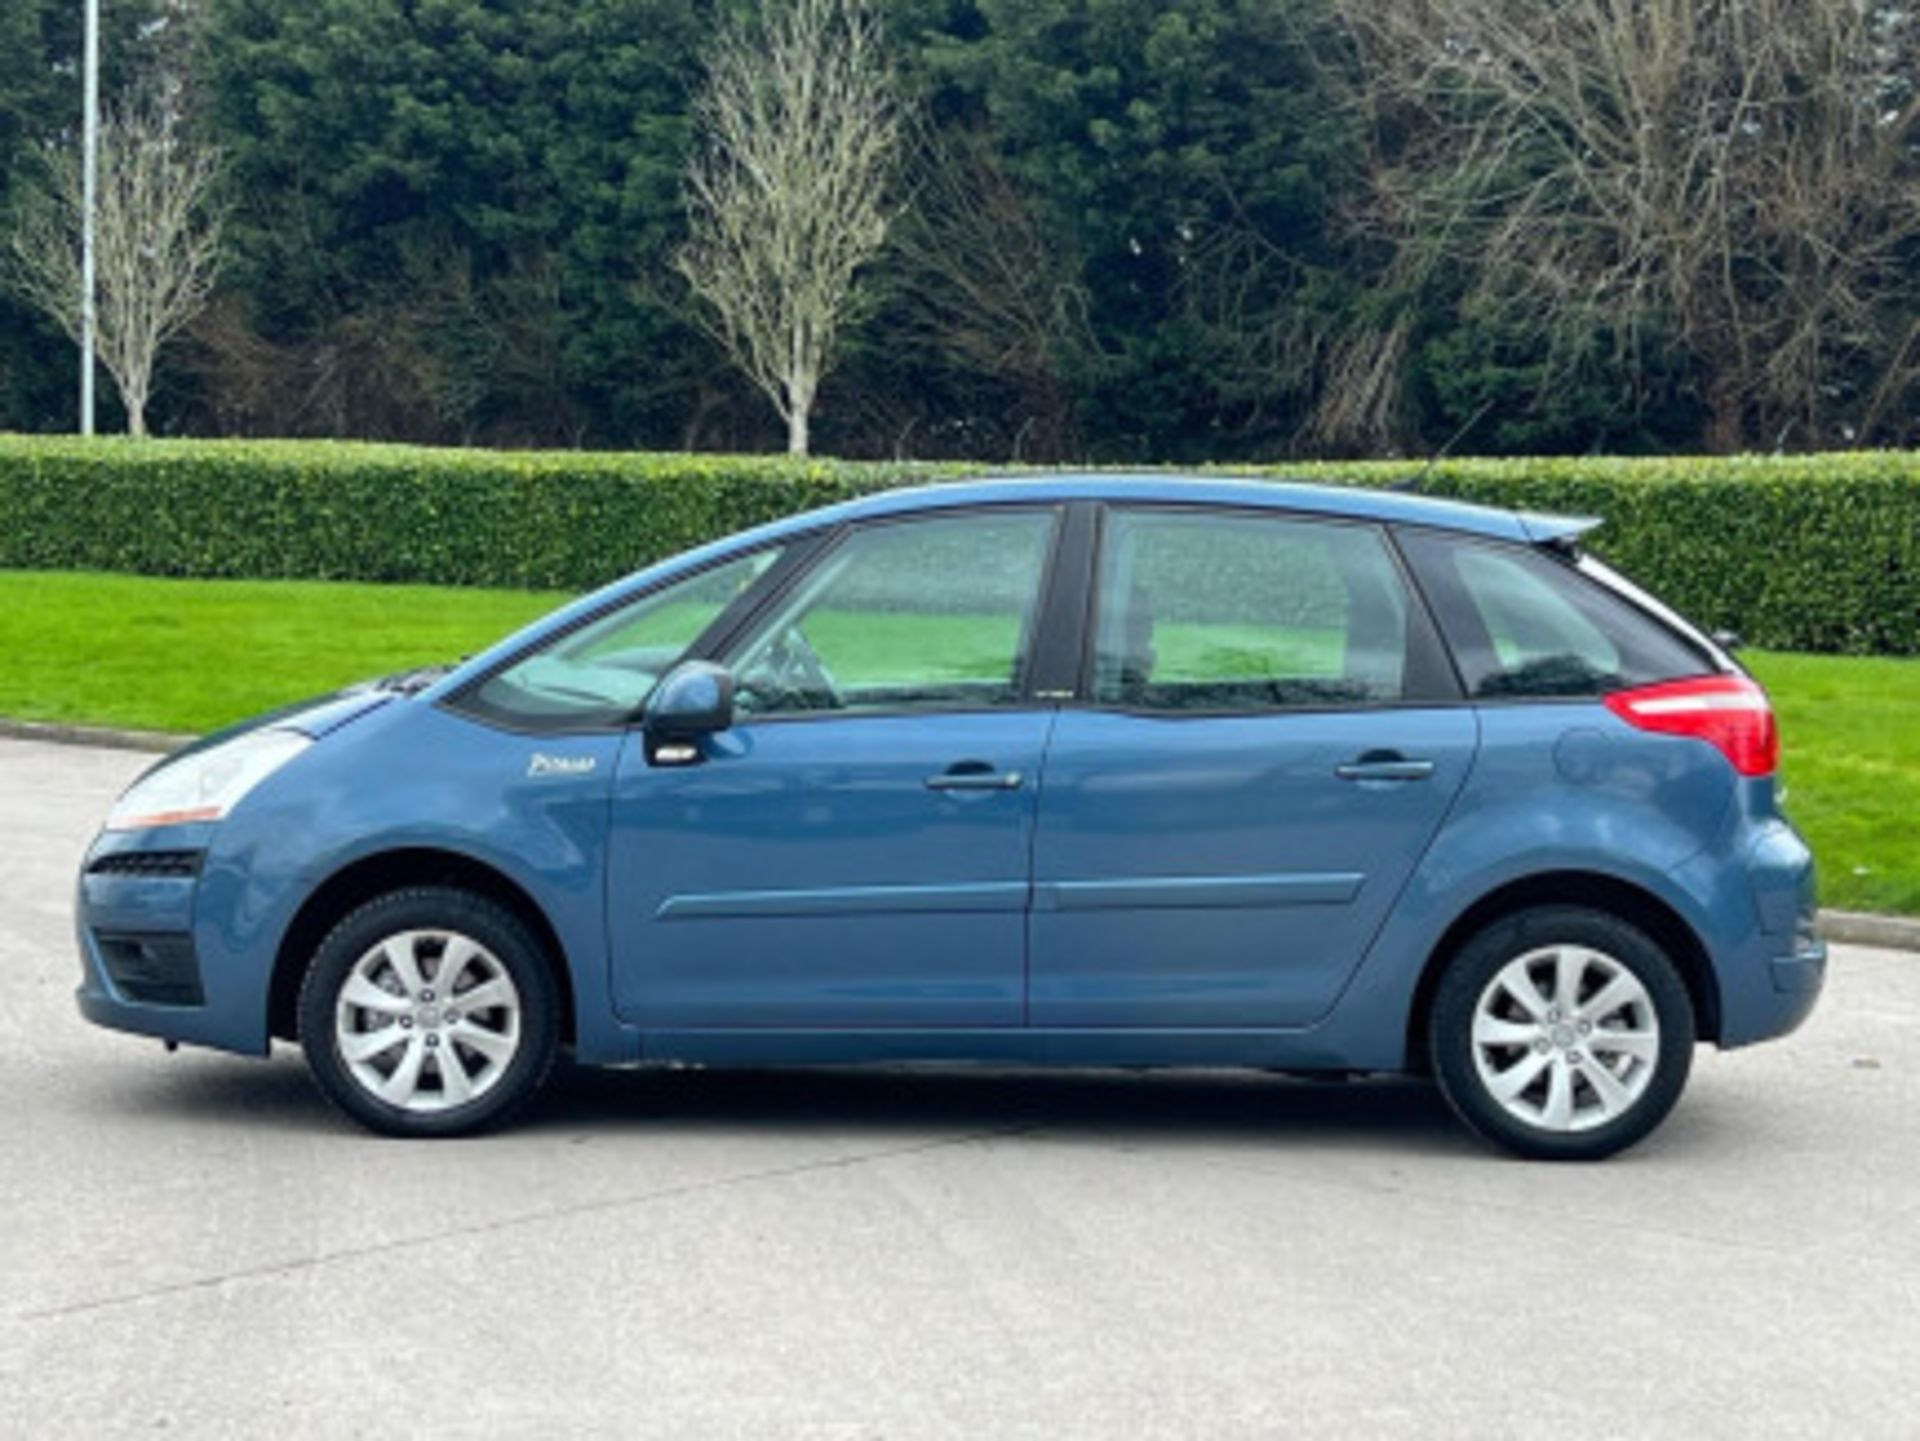 2009 CITROEN C4 PICASSO 1.6 HDI VTR+ EGS6 5DR >>--NO VAT ON HAMMER--<< - Image 51 of 123